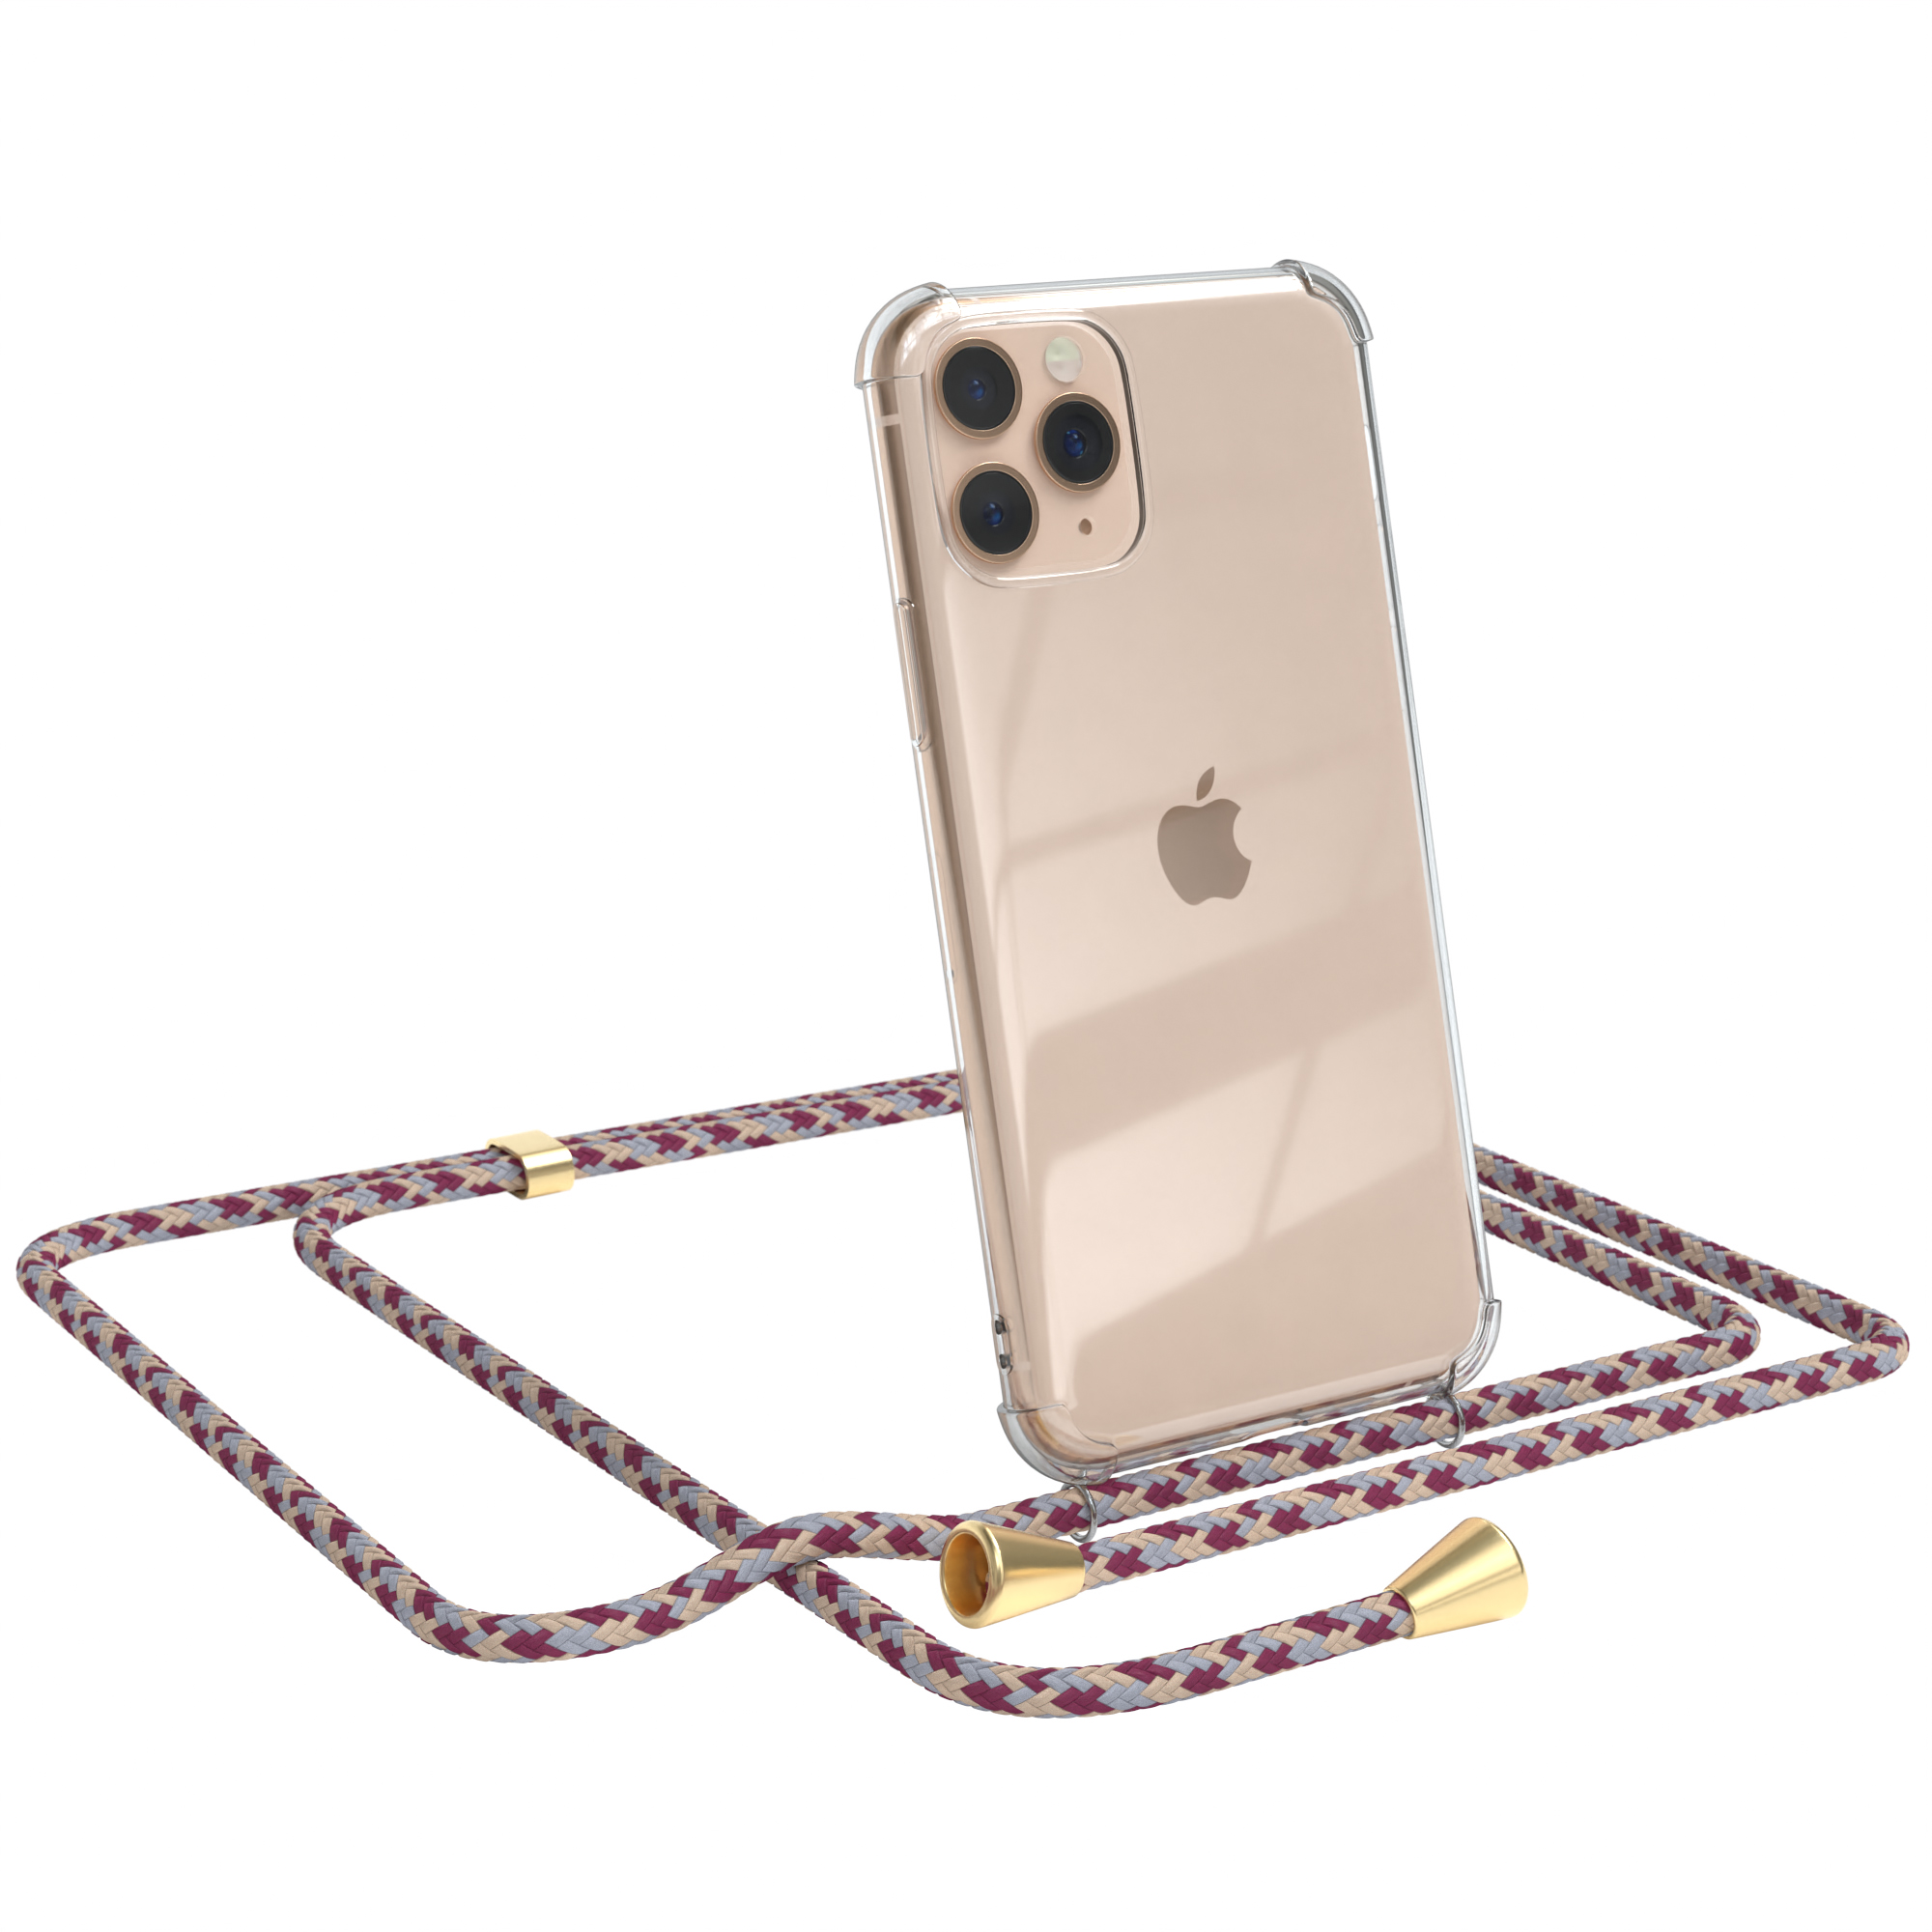 Umhängetasche, Pro, Cover CASE Clear Clips Umhängeband, iPhone Beige Apple, / Camouflage Gold EAZY 11 mit Rot